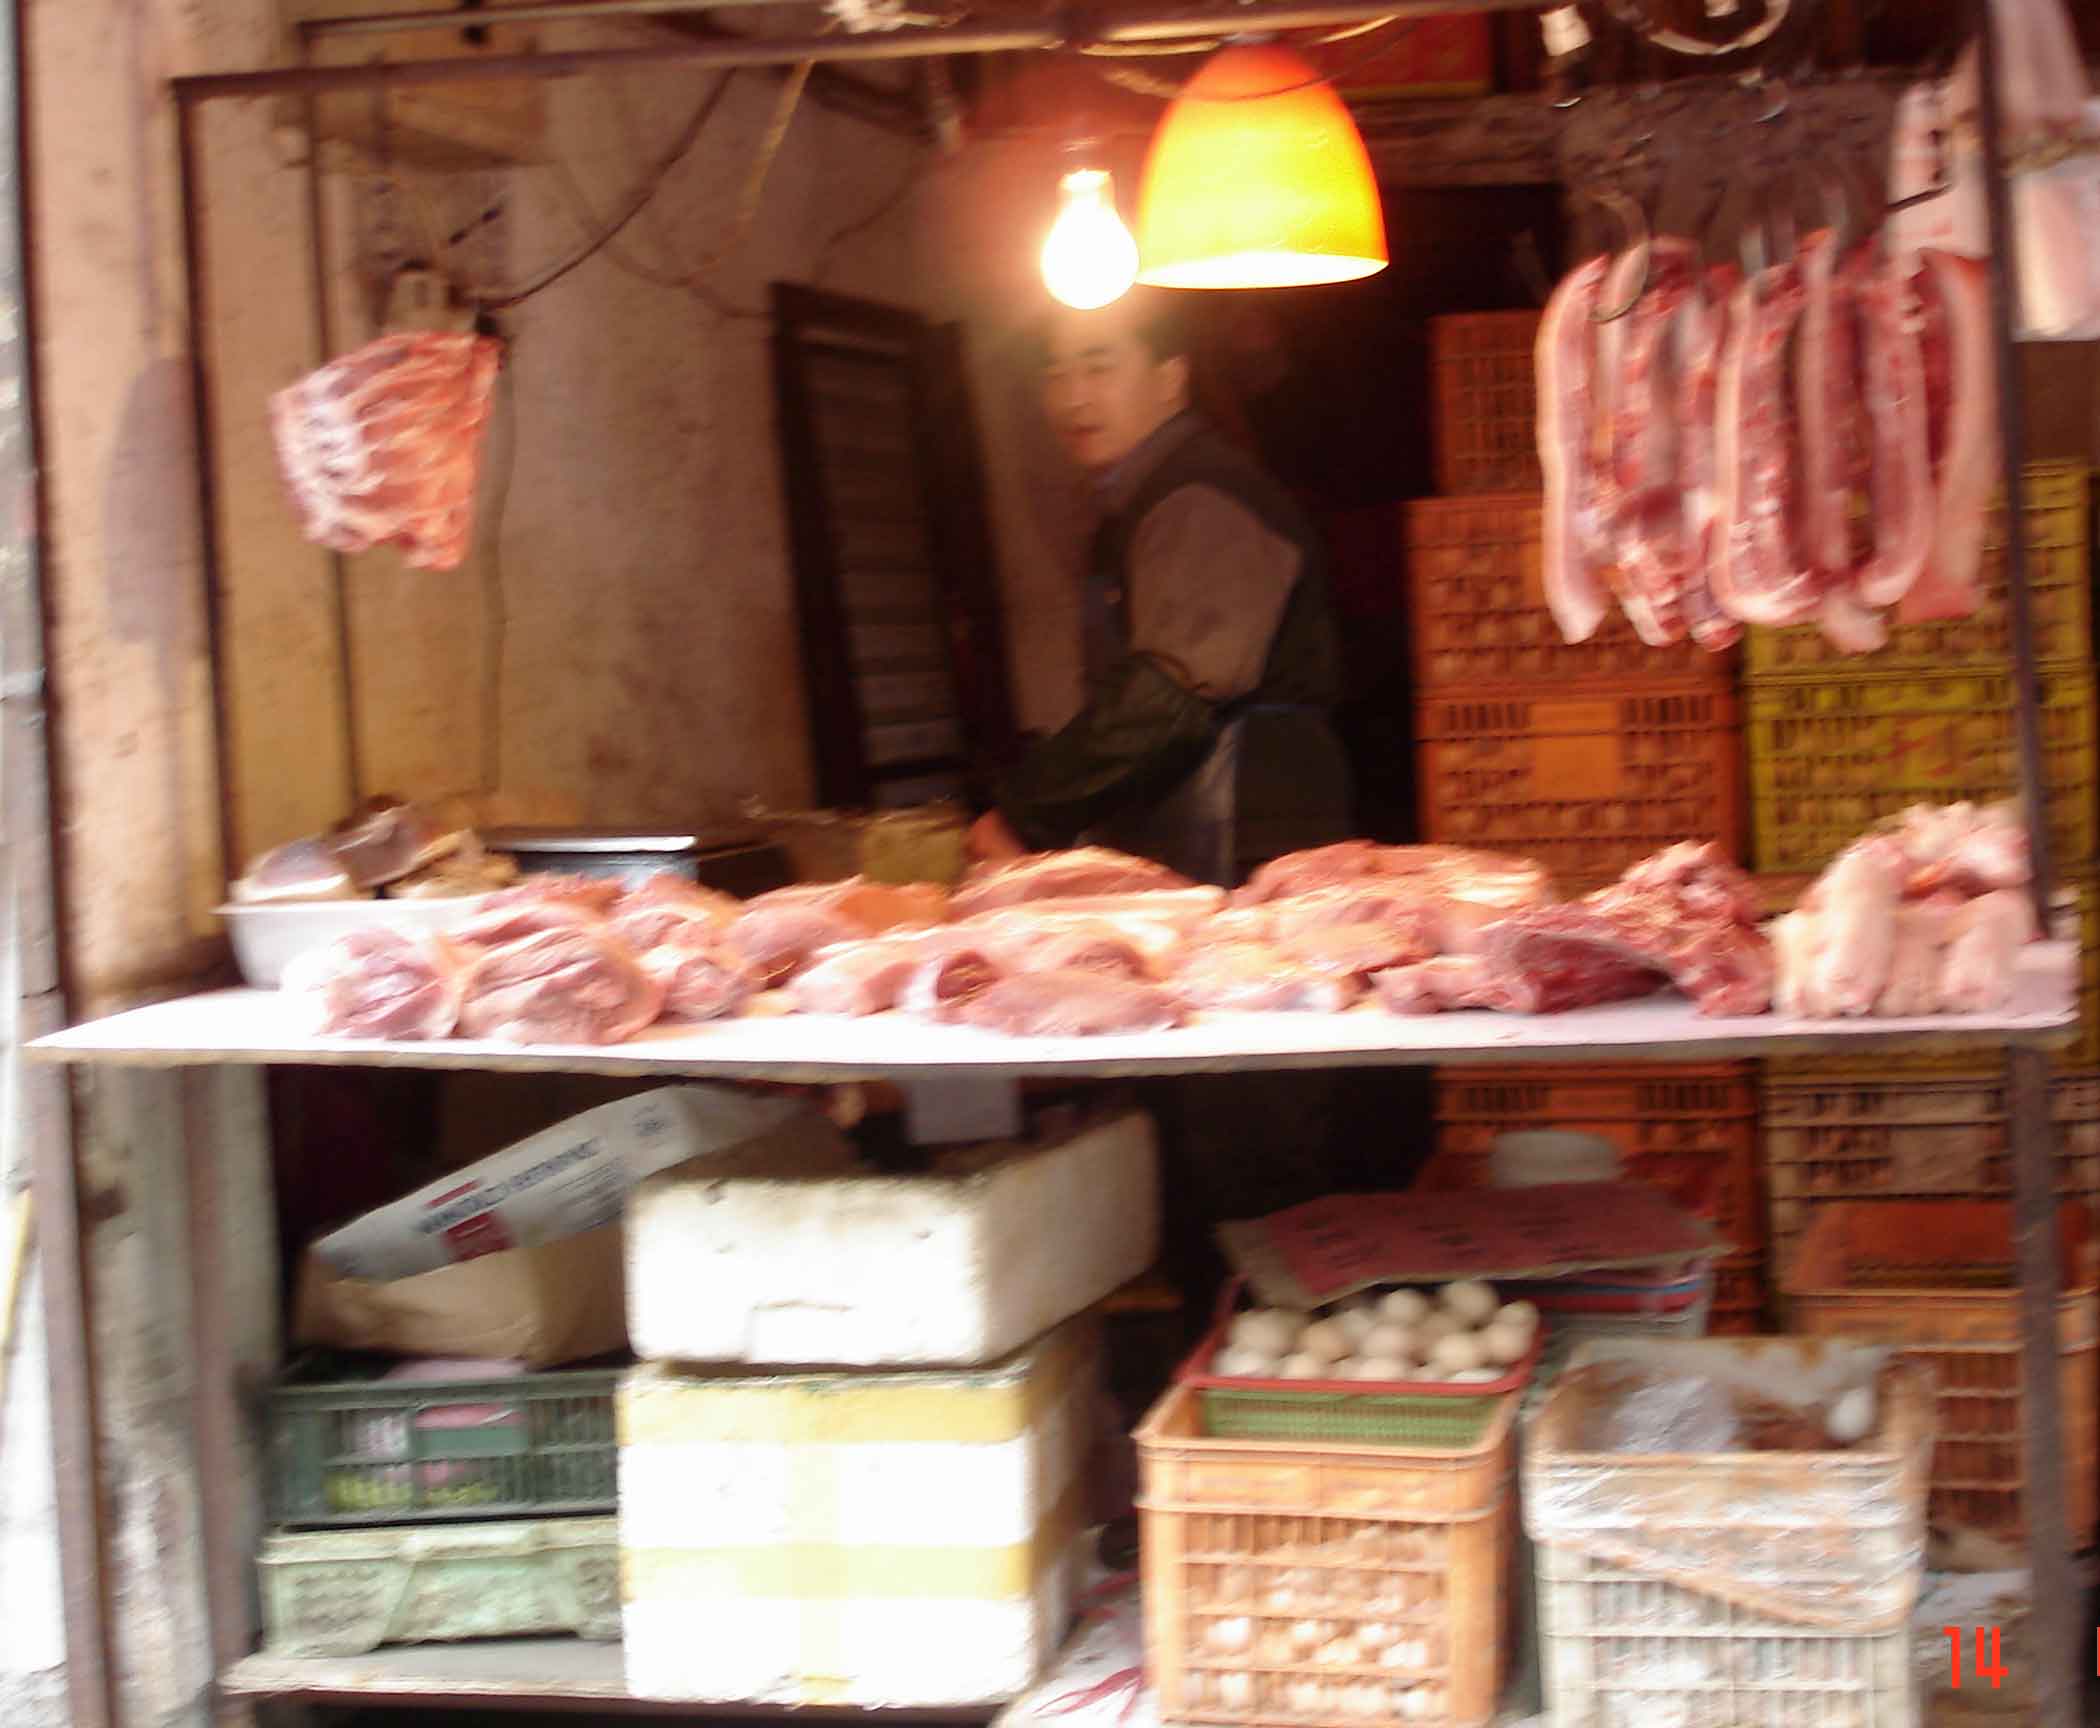 Chinatown markets - fresh eggs and freshly cut meat